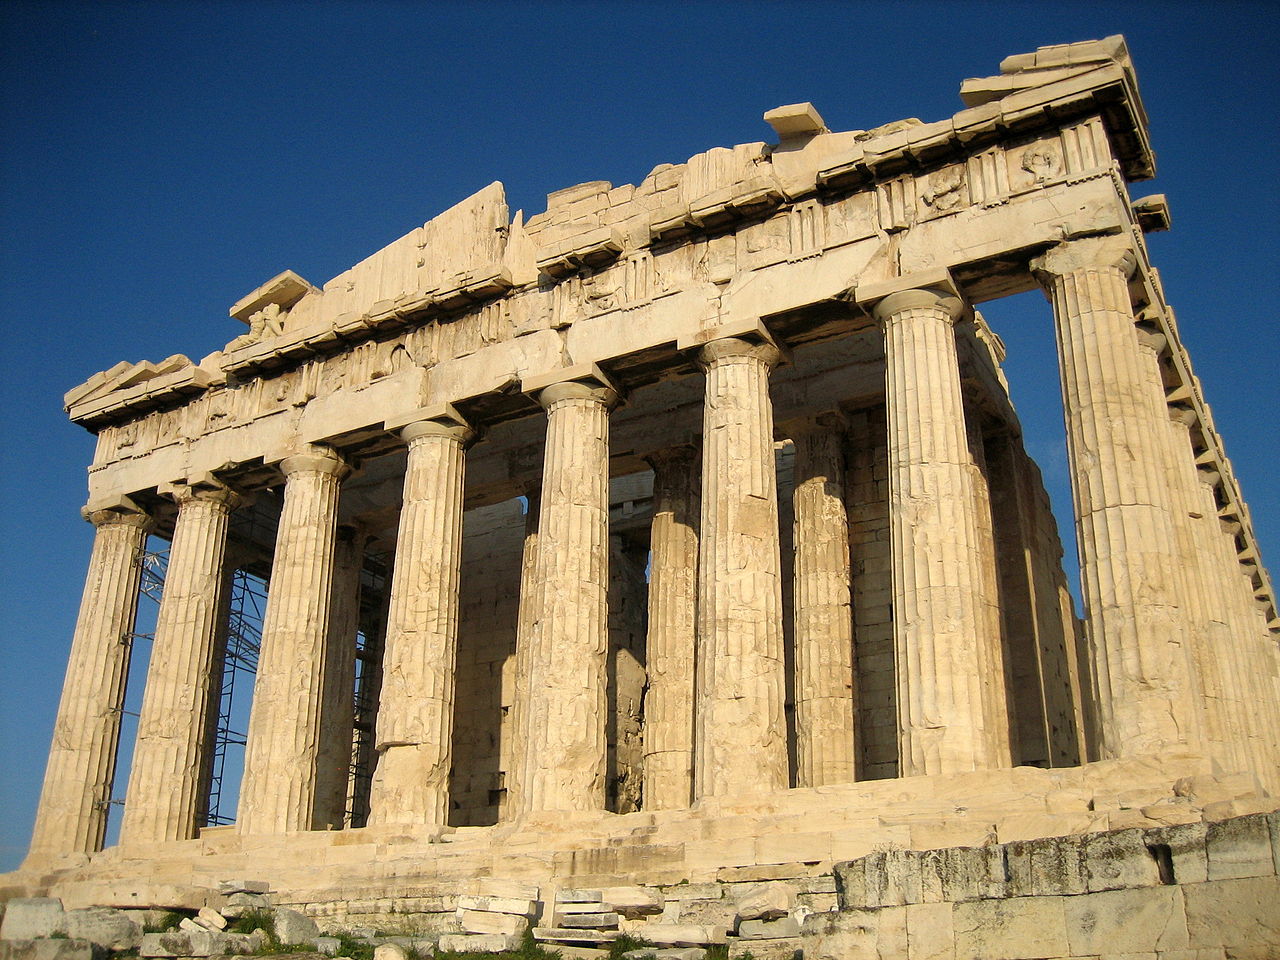 The Parthenon epitomizes the sophisticated culture of Ancient Greece